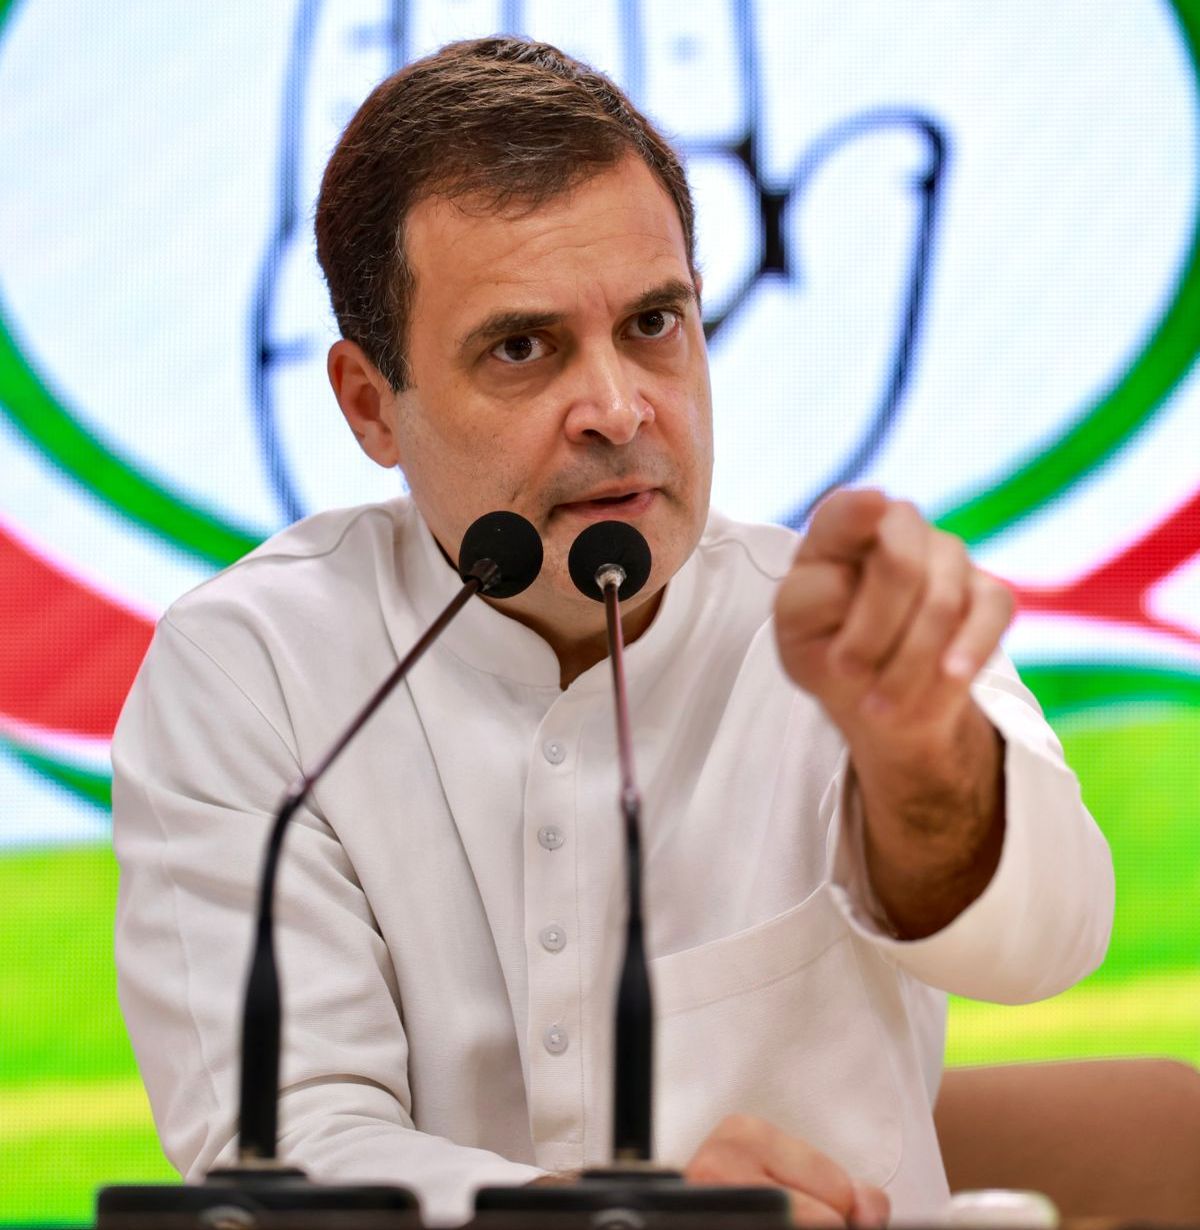 Farmers being 'systematically attacked': Rahul